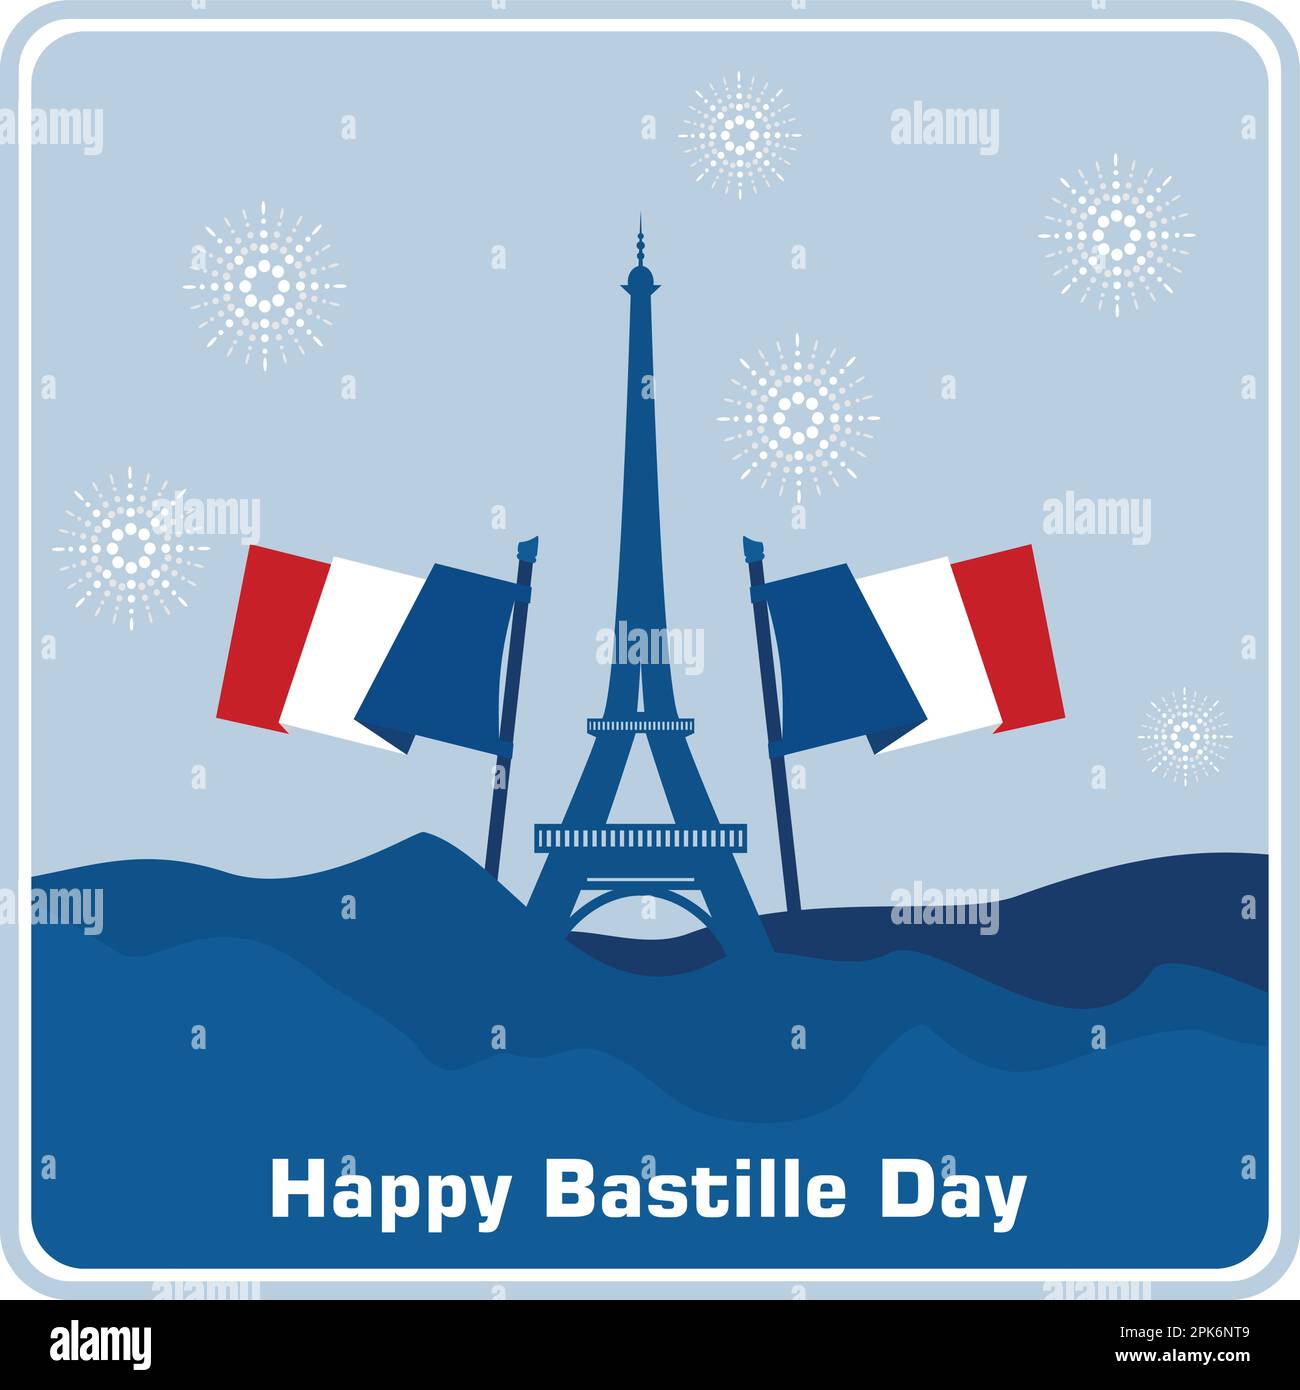 Eiffel Tower, salute and flags. French National Day. Happy Bastille day. modern background illustration Stock Vector